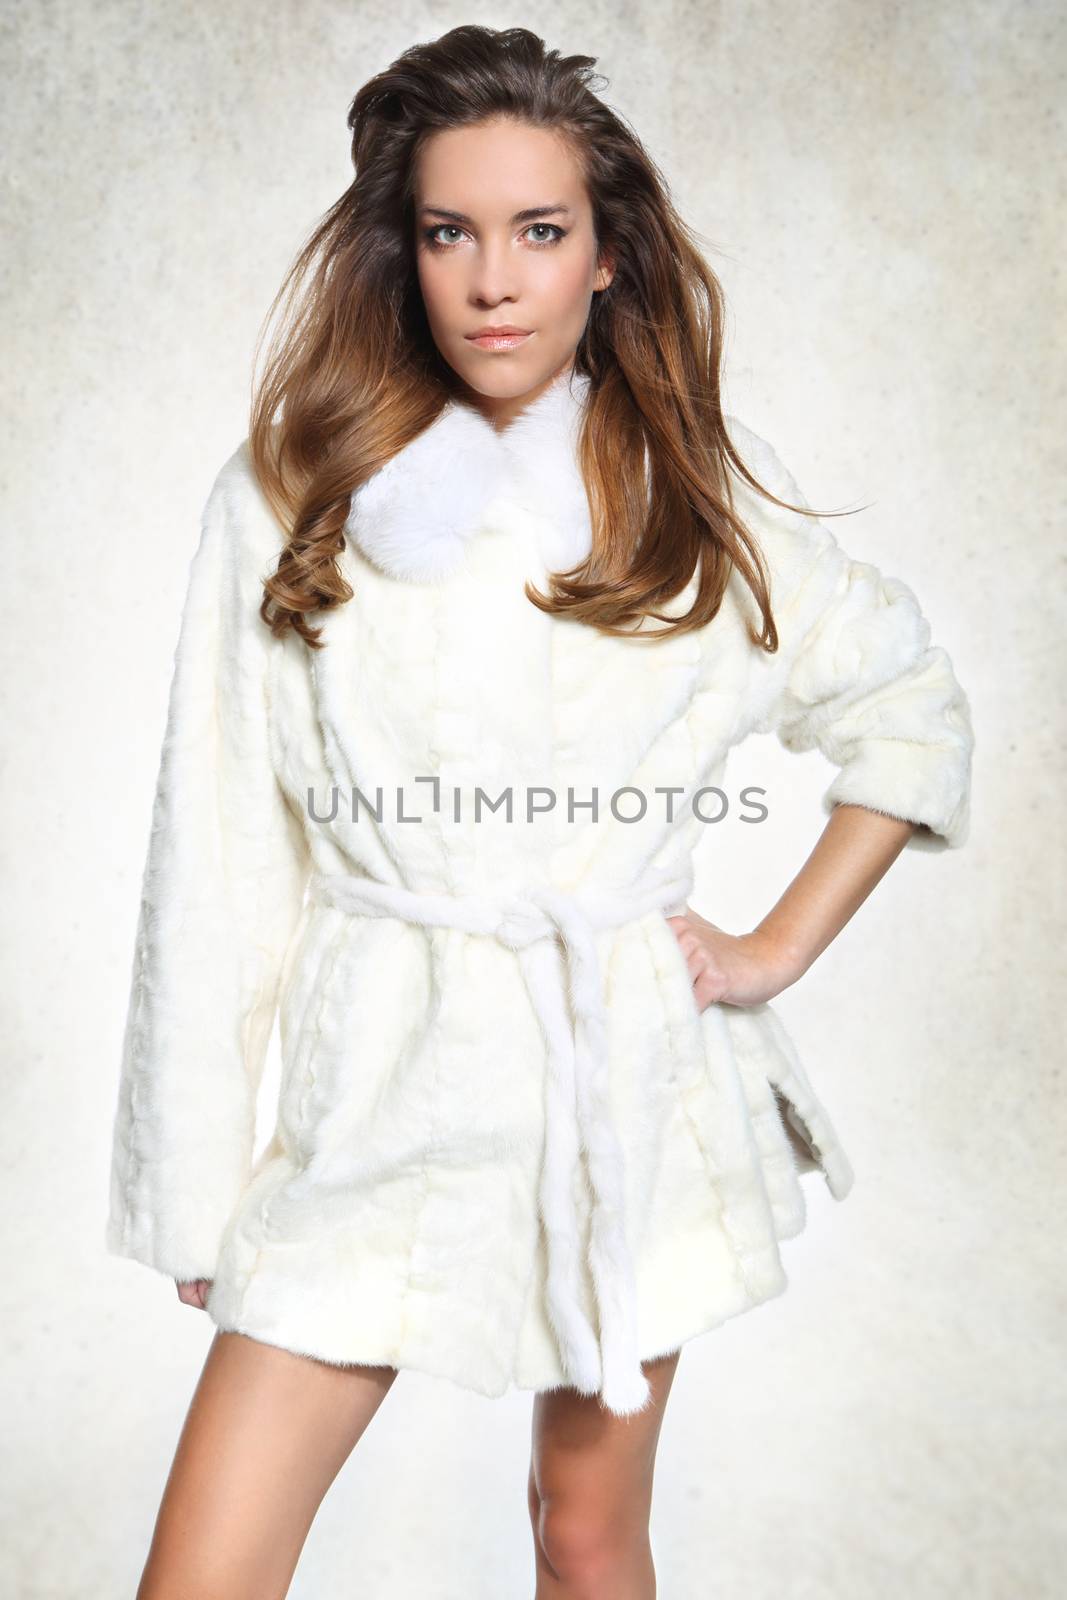 Brunette fashion model in white fur posing on a white background